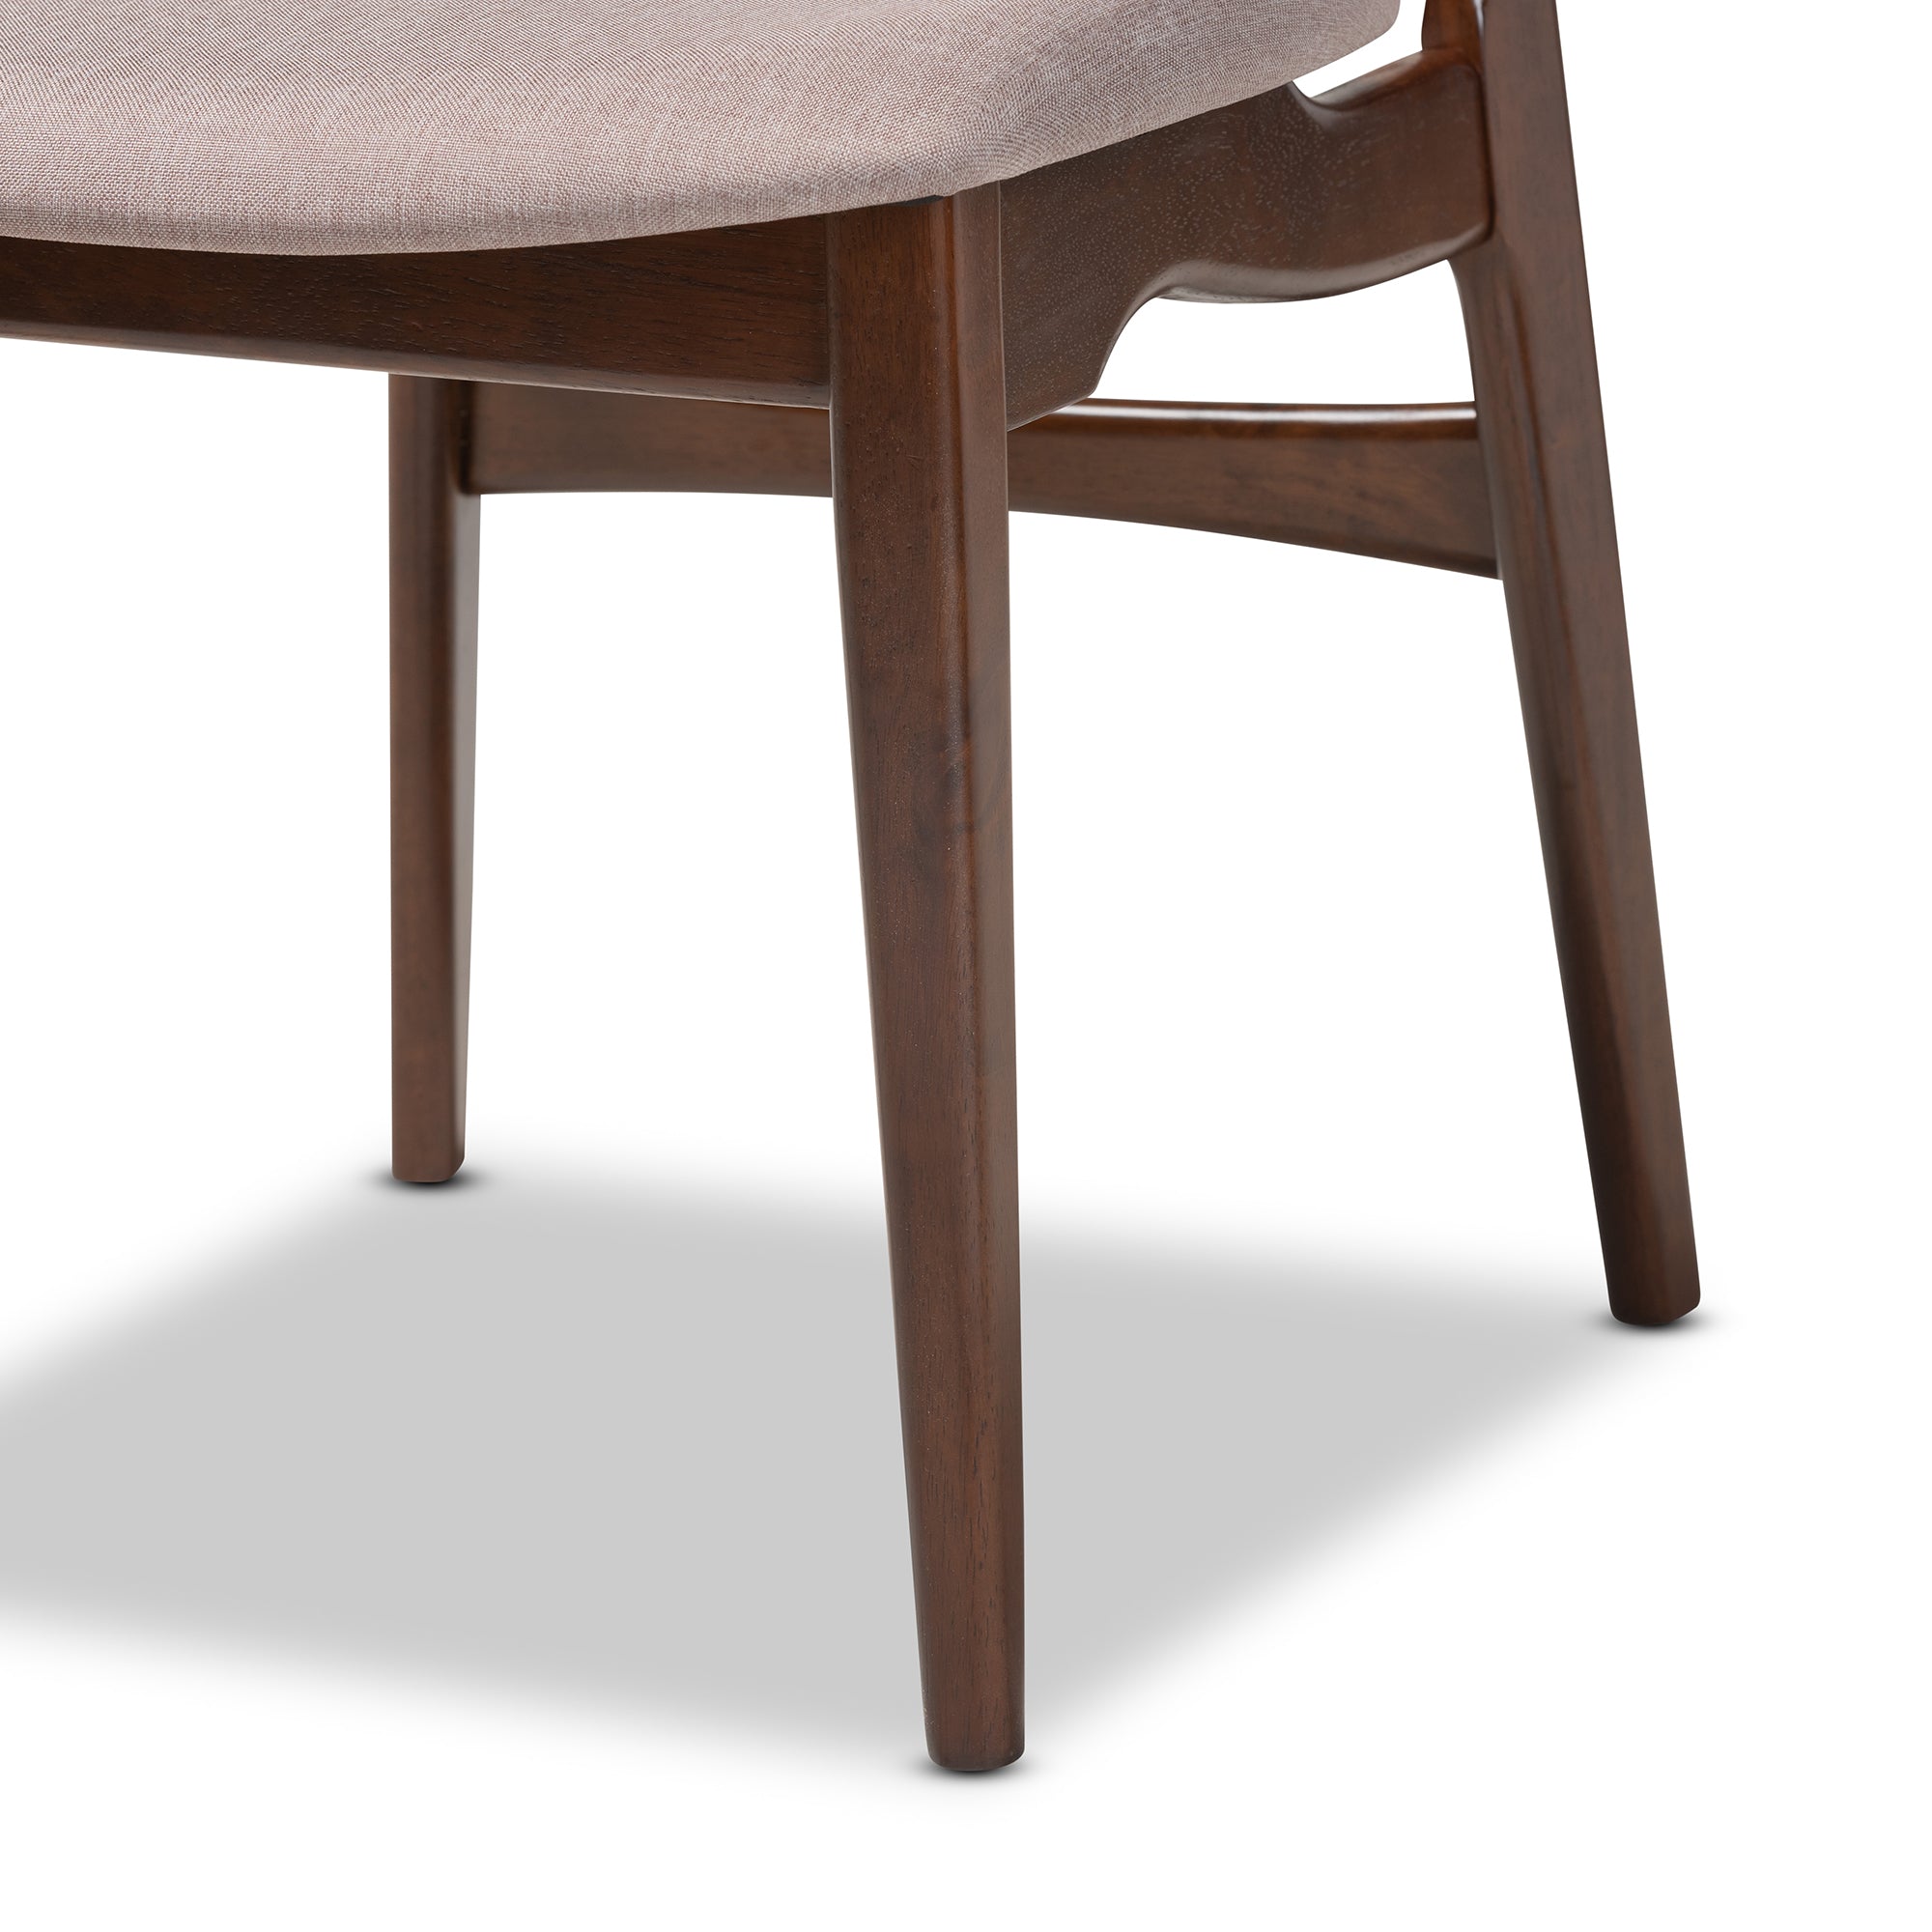 Daria Mid-Century Table & Dining Chairs-Dining Set-Baxton Studio - WI-Wall2Wall Furnishings